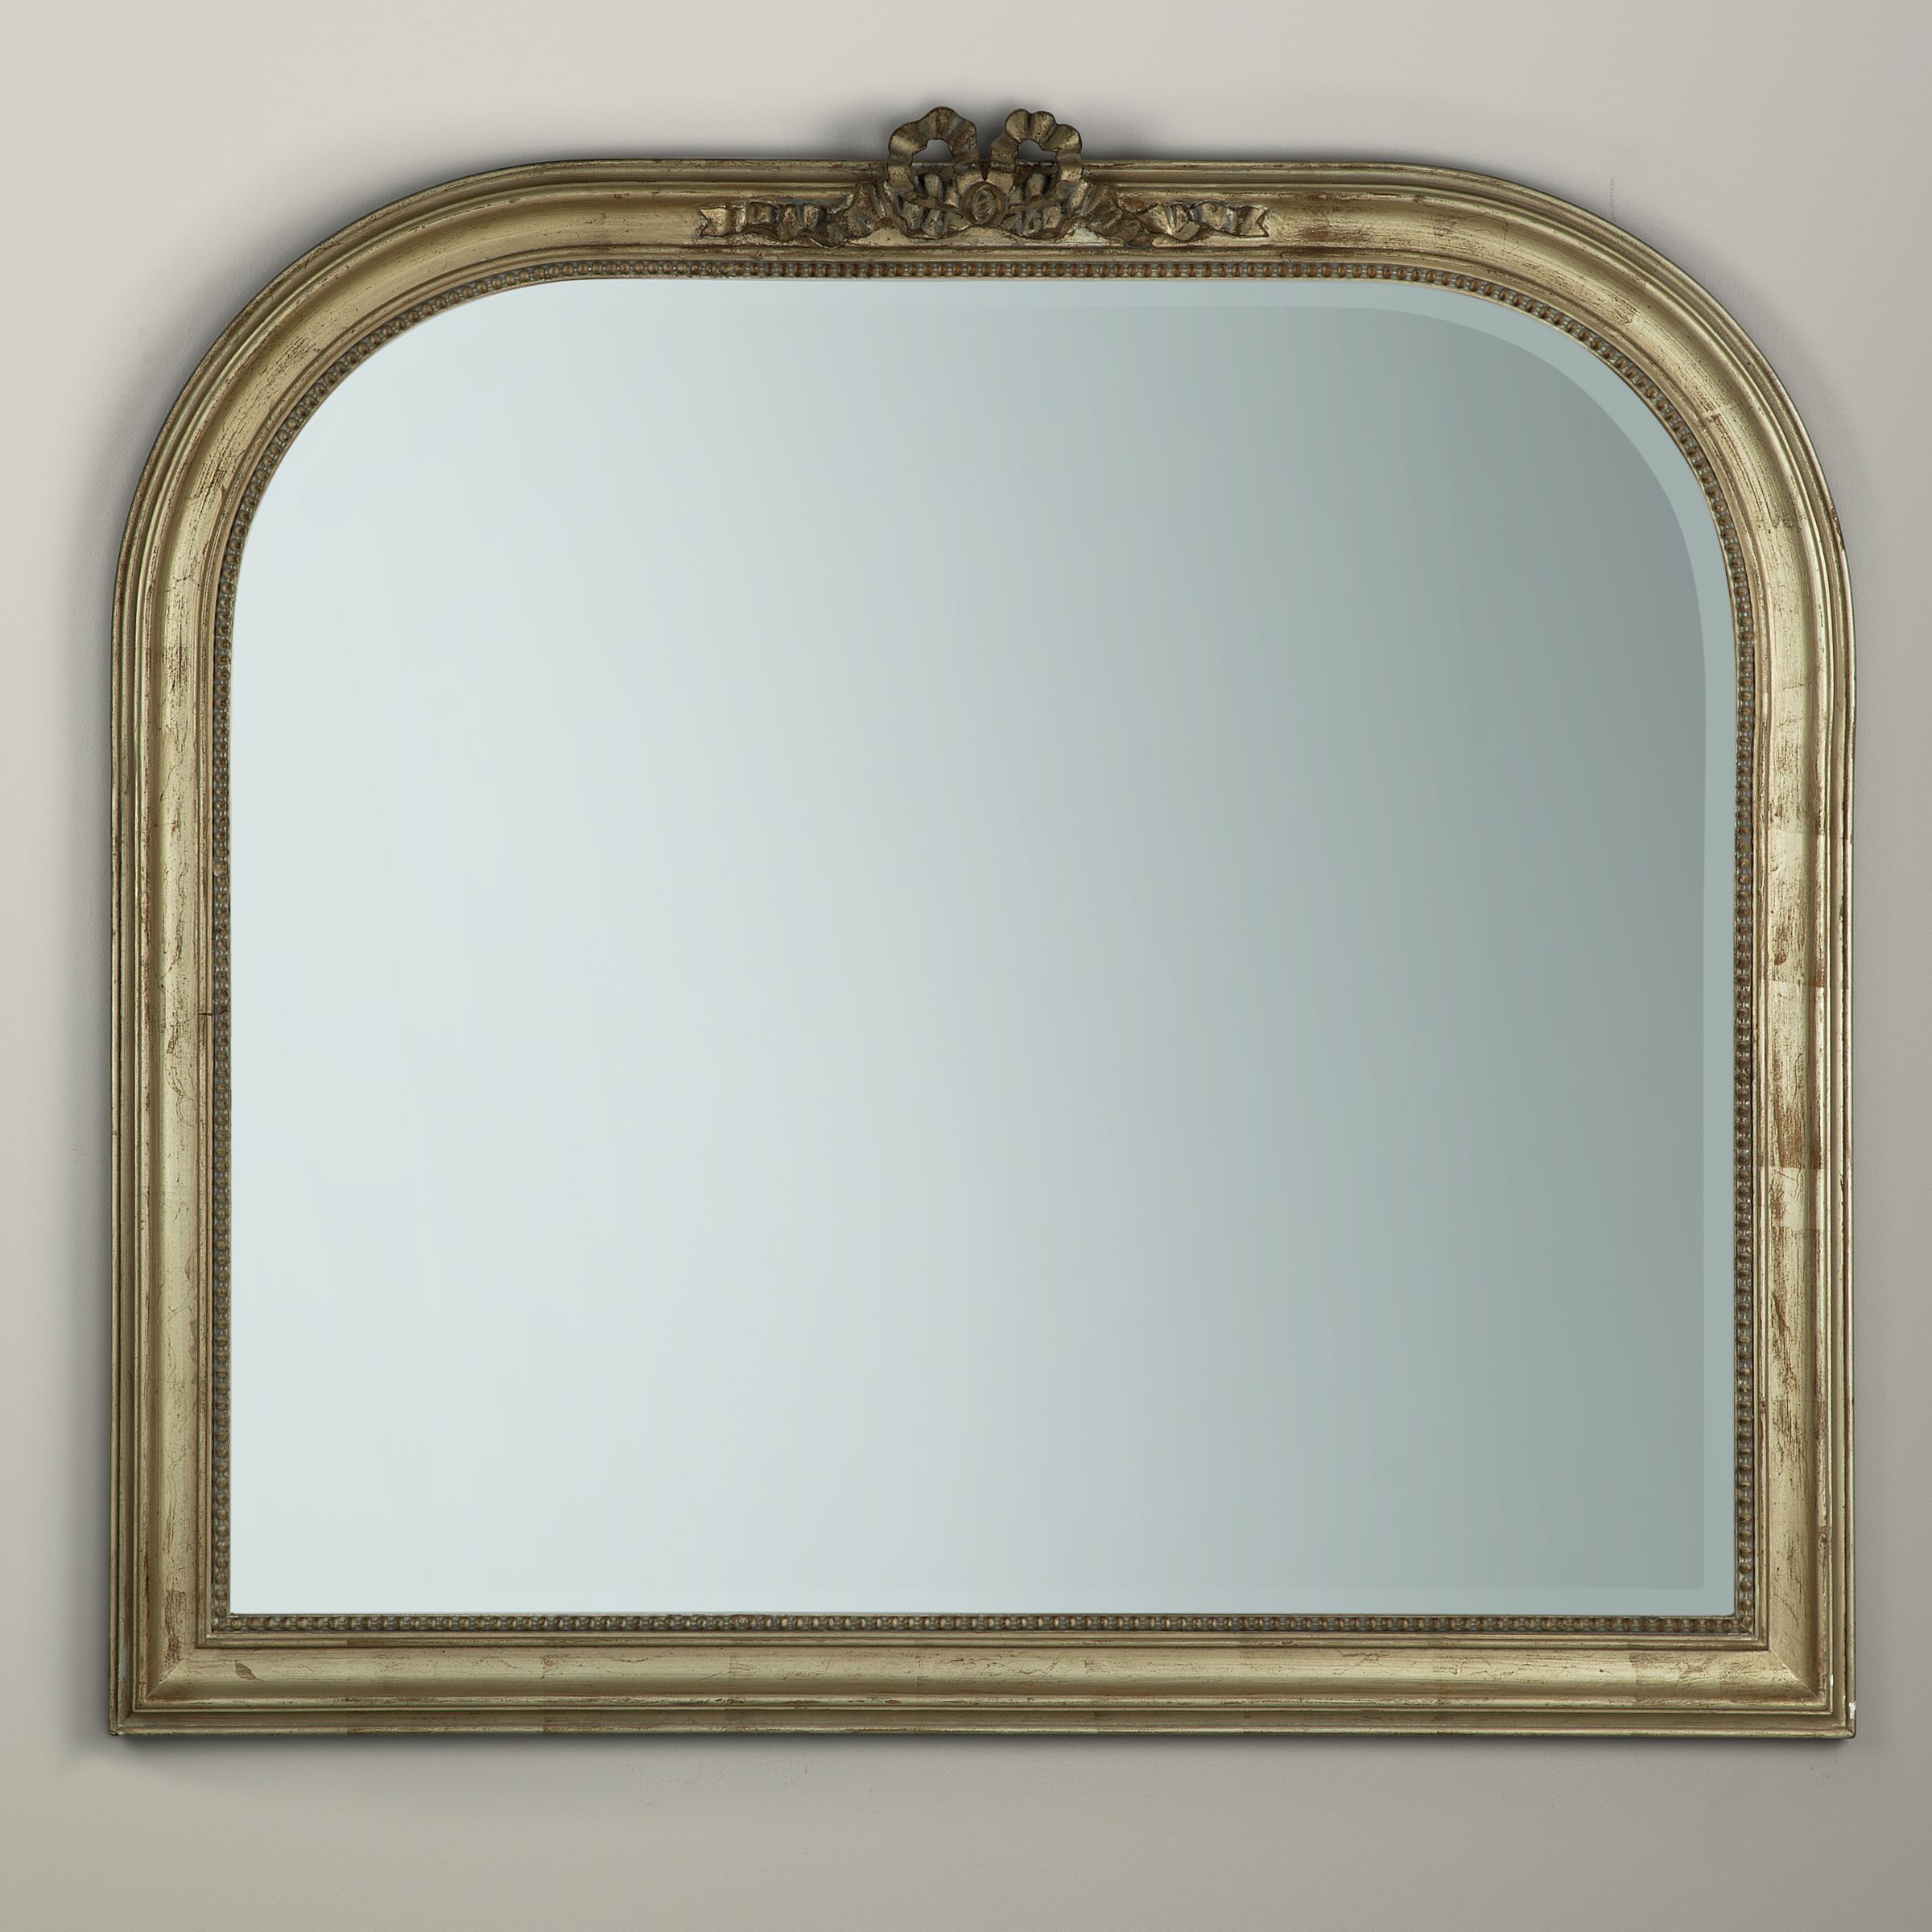 Overmantle Bow Mirror Gold 95 X 106cm, Gold Over Mantle Mirror Uk